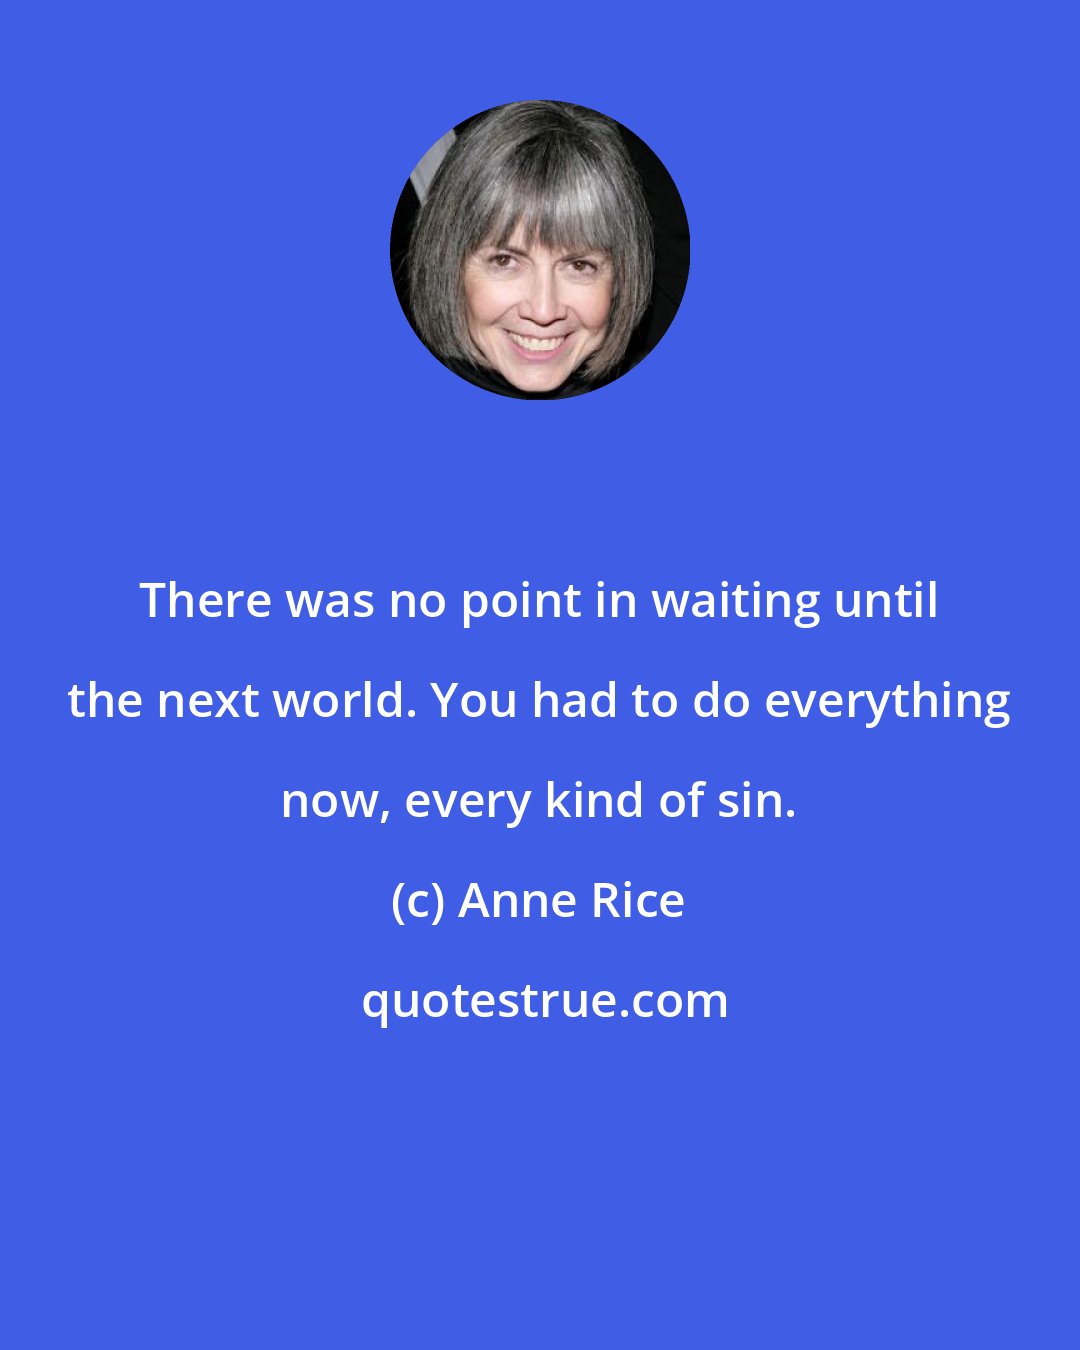 Anne Rice: There was no point in waiting until the next world. You had to do everything now, every kind of sin.